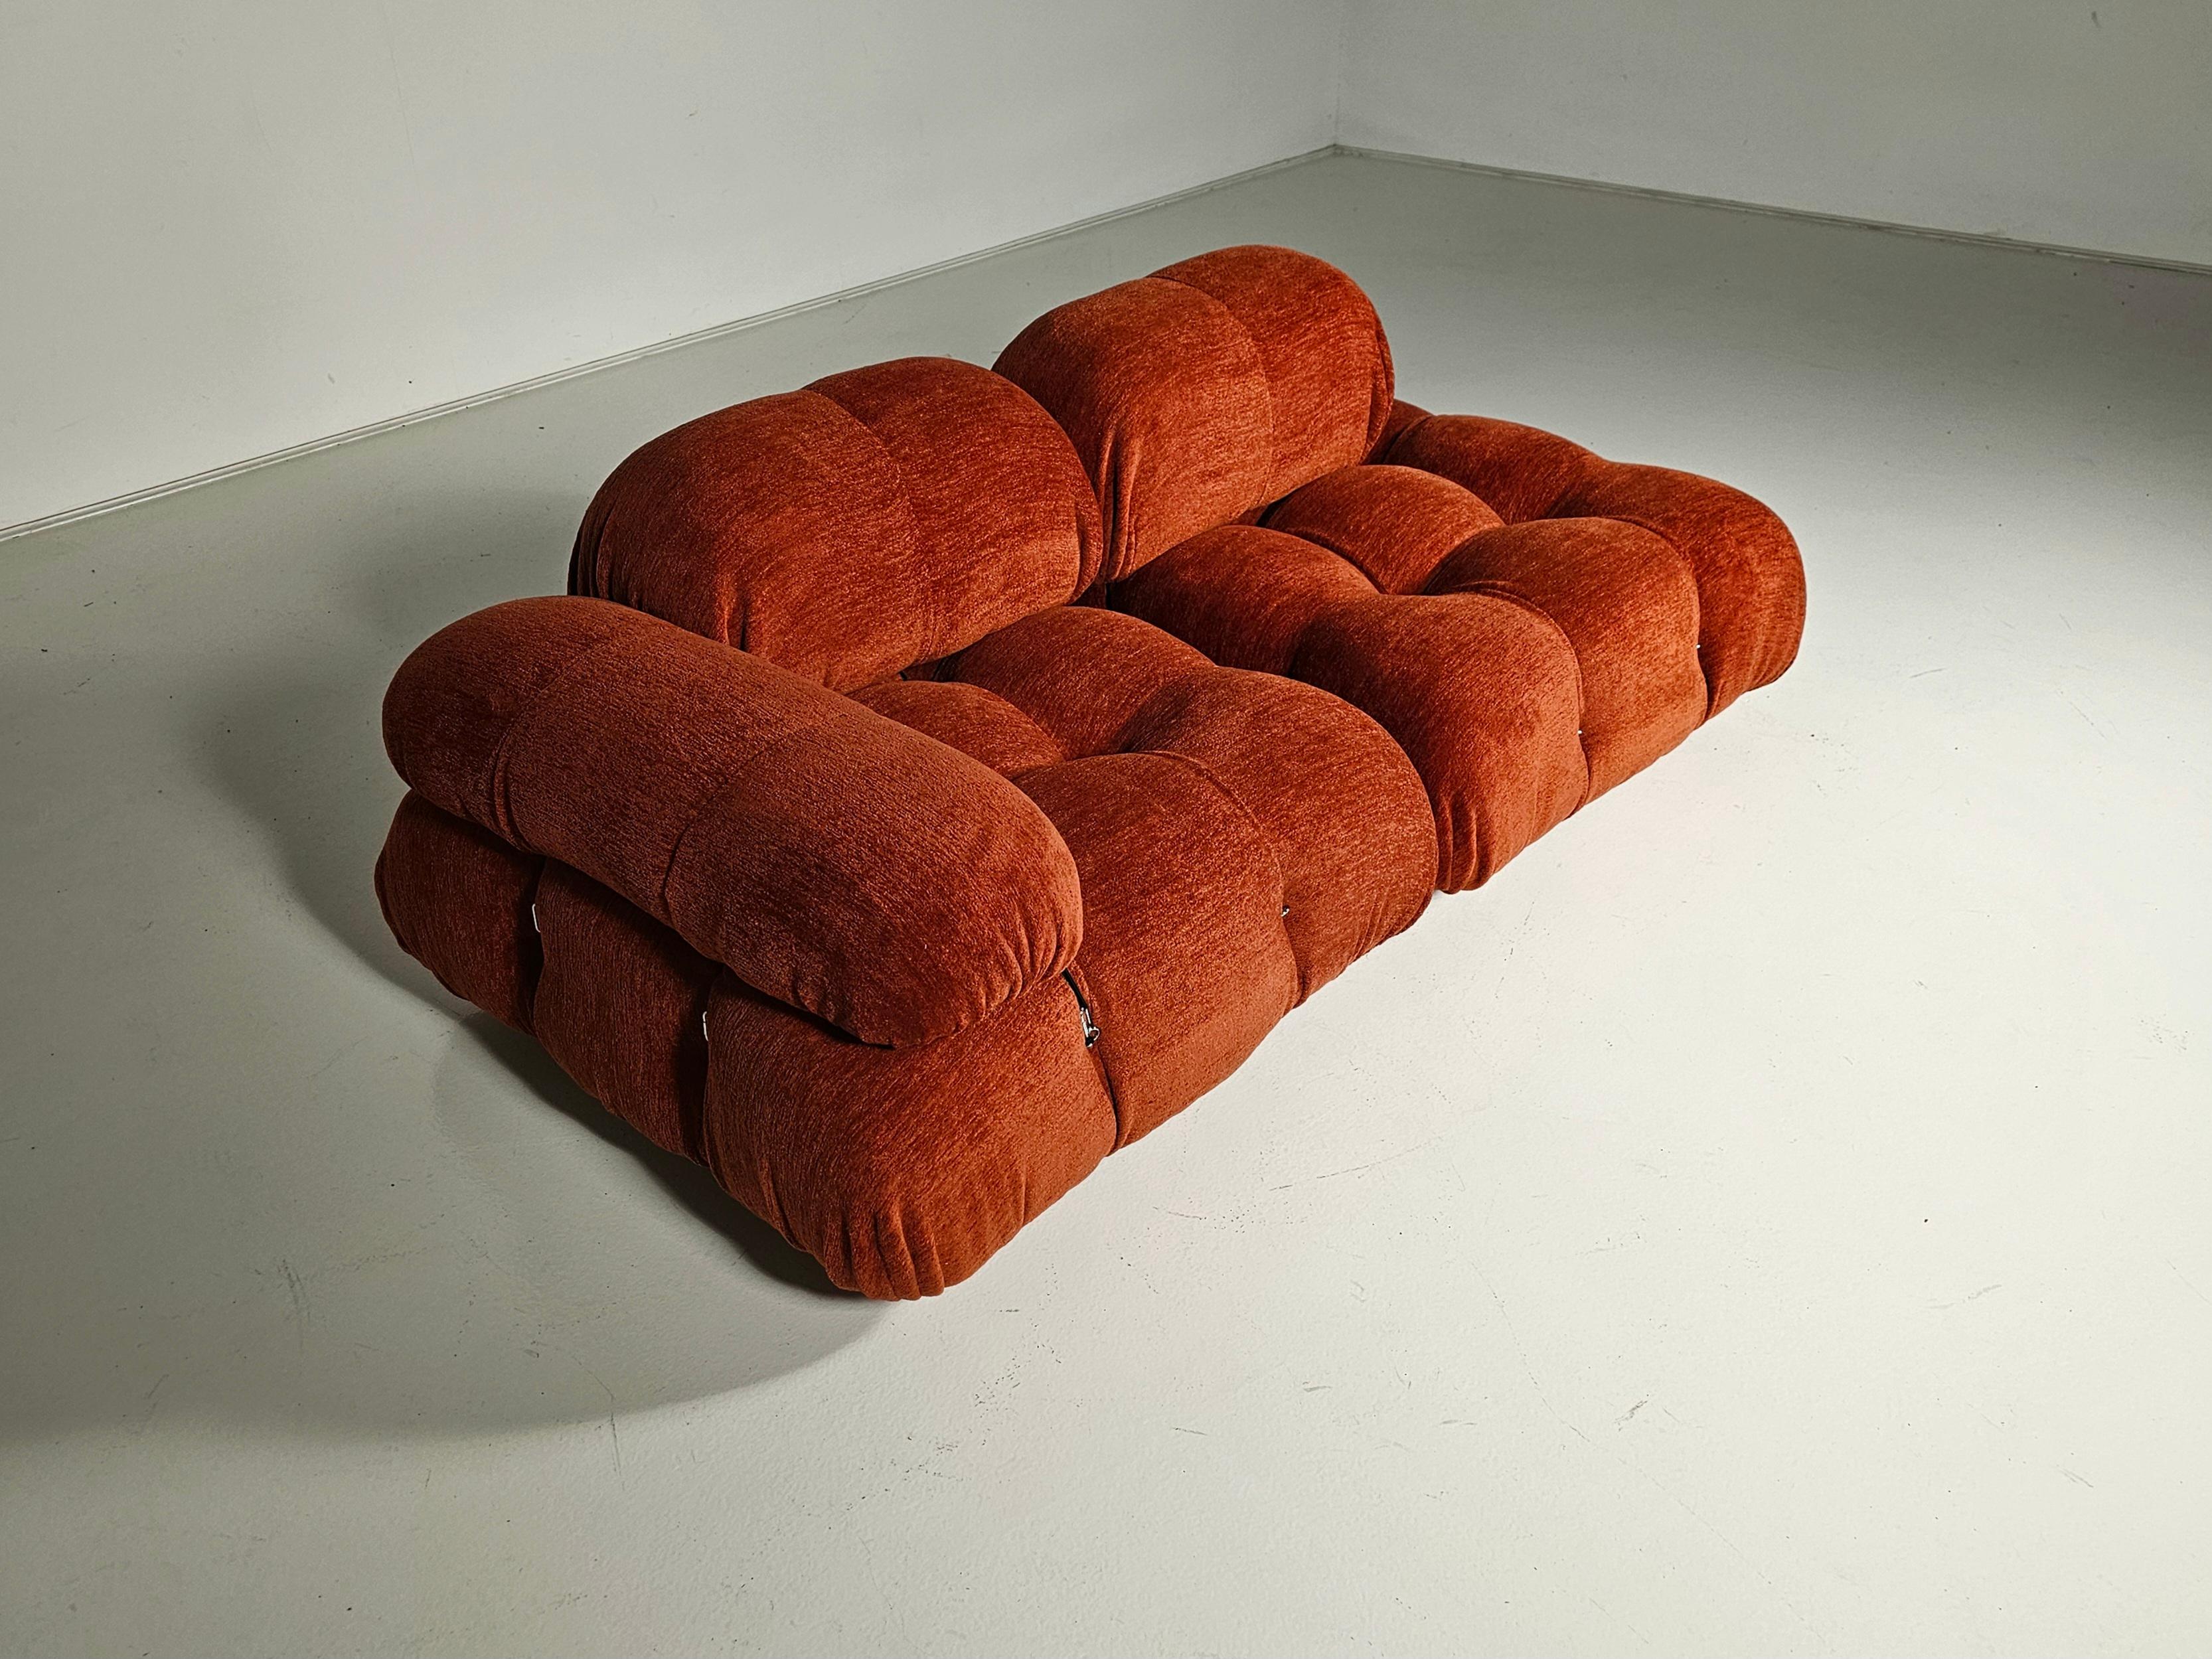 Mario Bellini Camaleonda chaise lounge sofa for C&B Italy, the 1970s. Reupholstered in a stunning burned orange Pierre Frey Chenille fabric.

This luxurious combination not only exudes elegance but also offers unparalleled comfort, making it the